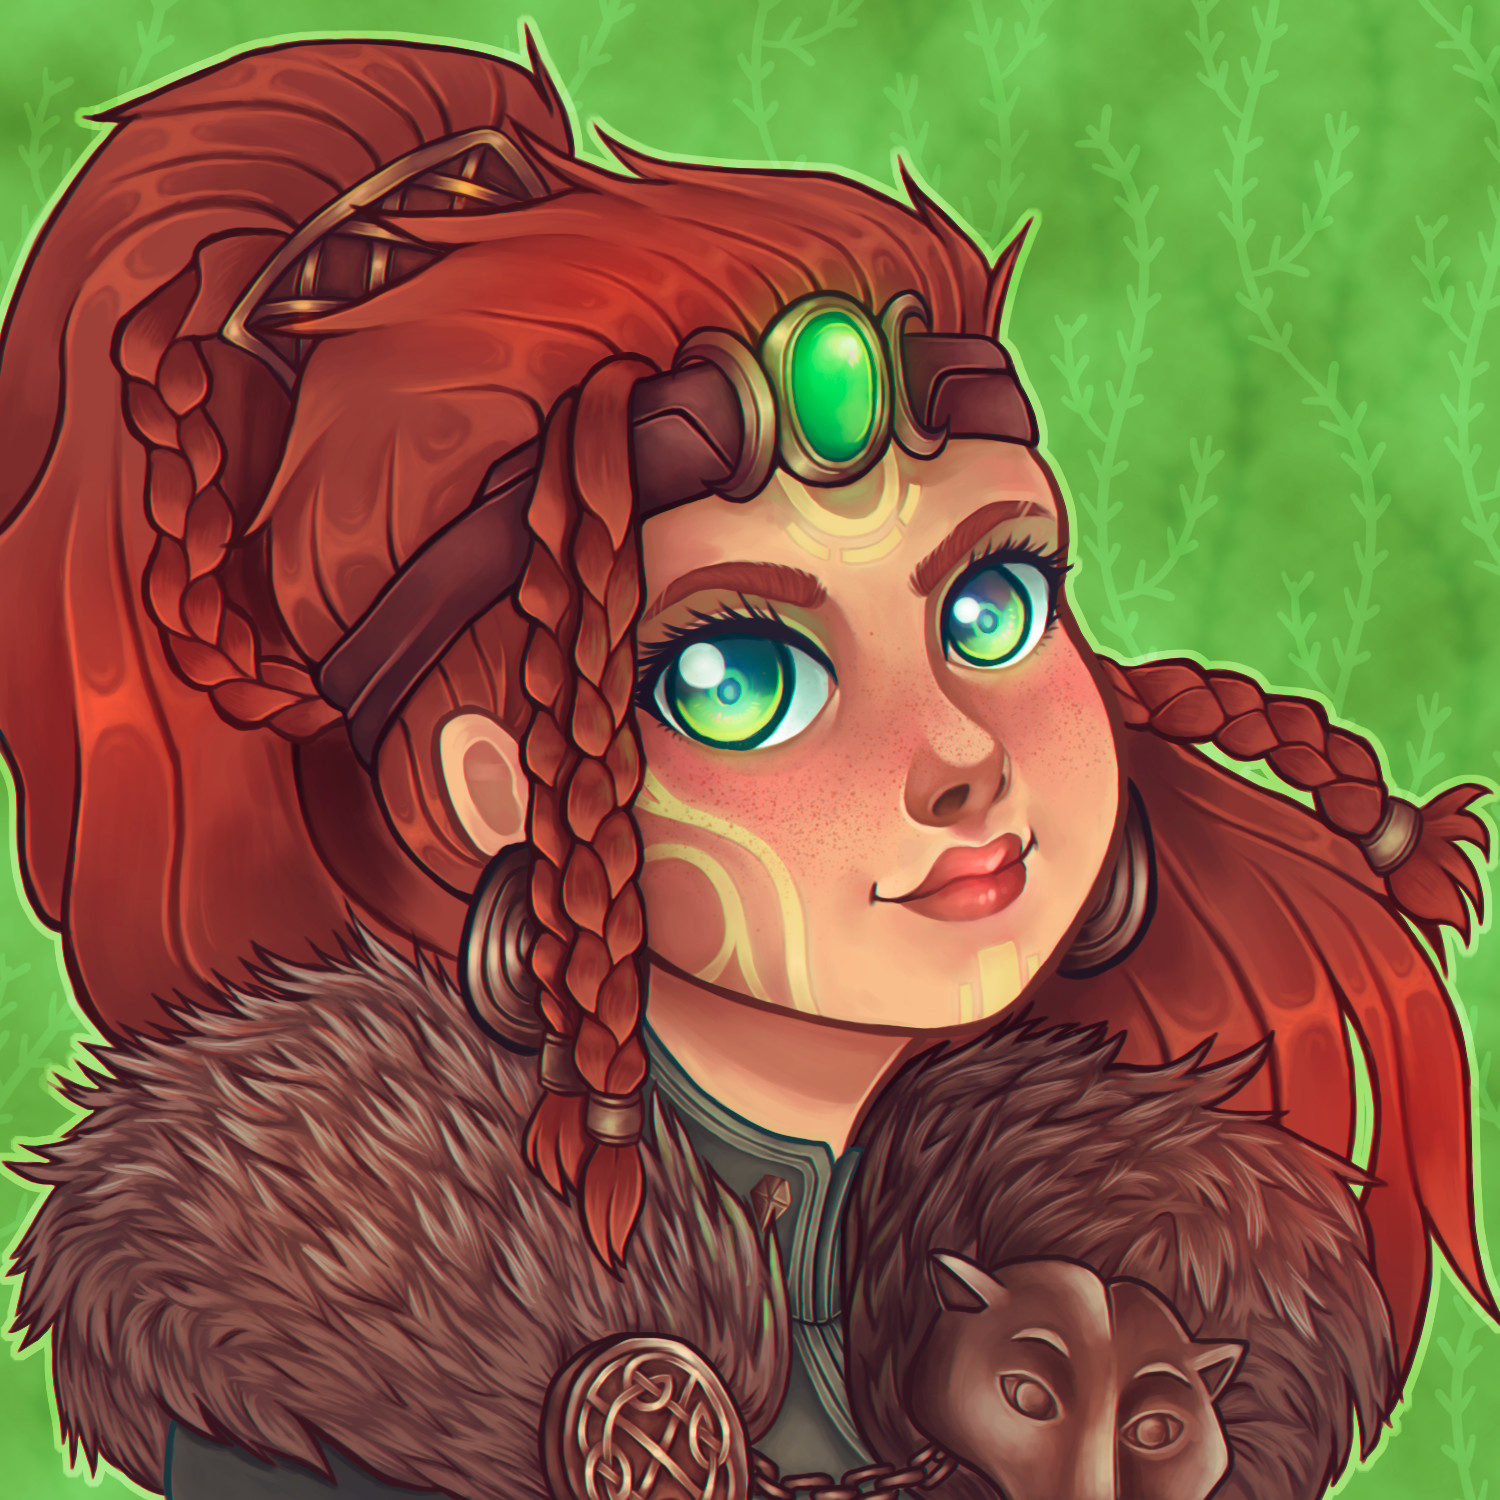 Fanart of Artio (in cutesy avatar style) from SMITE game. 